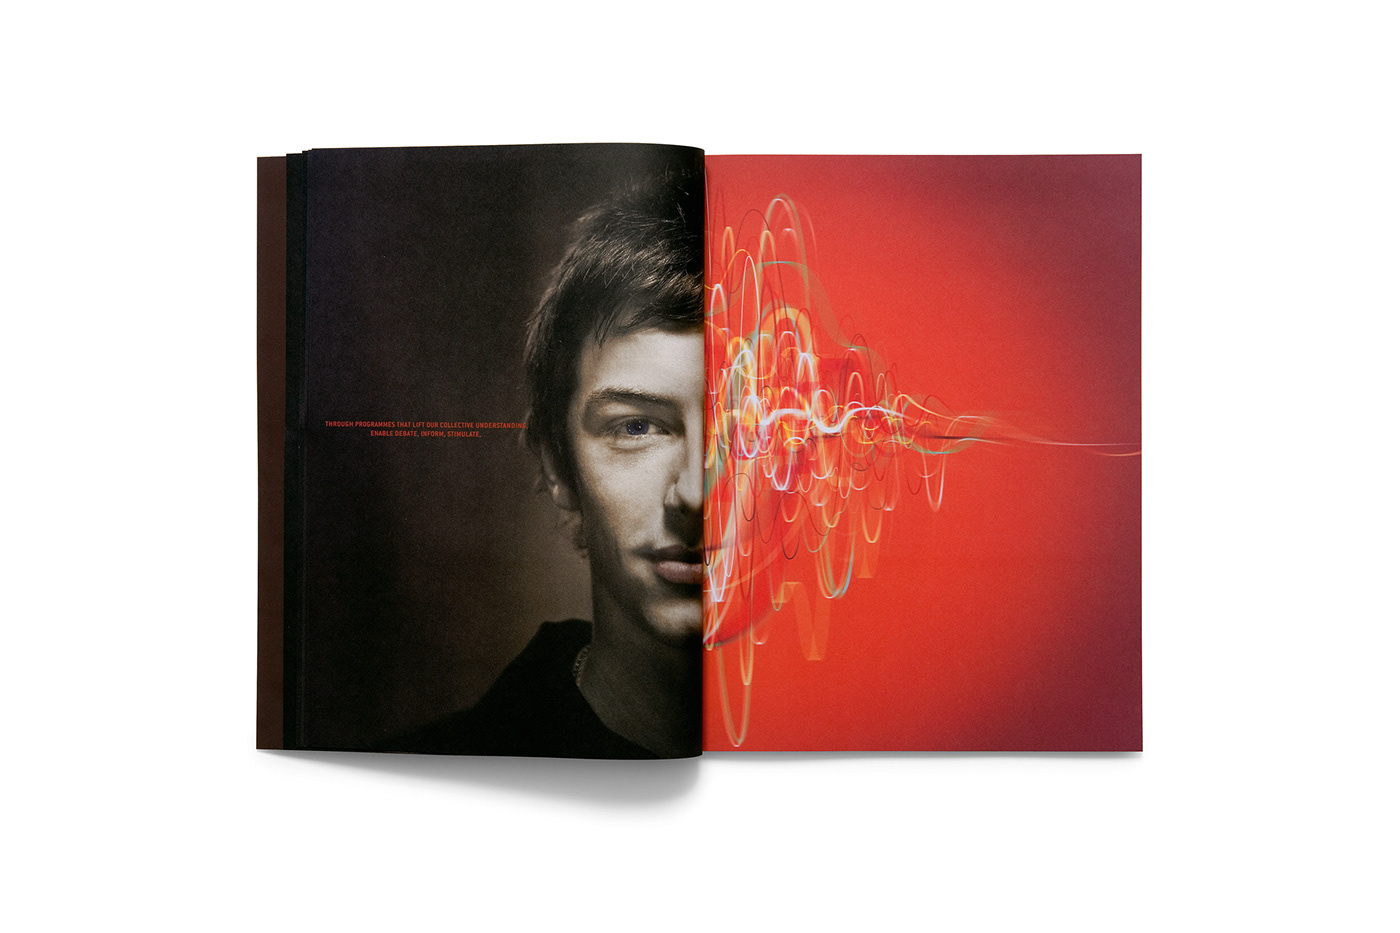 annual report design retouch People Portraits sound waves Corporate Communication creative awarded 2di4